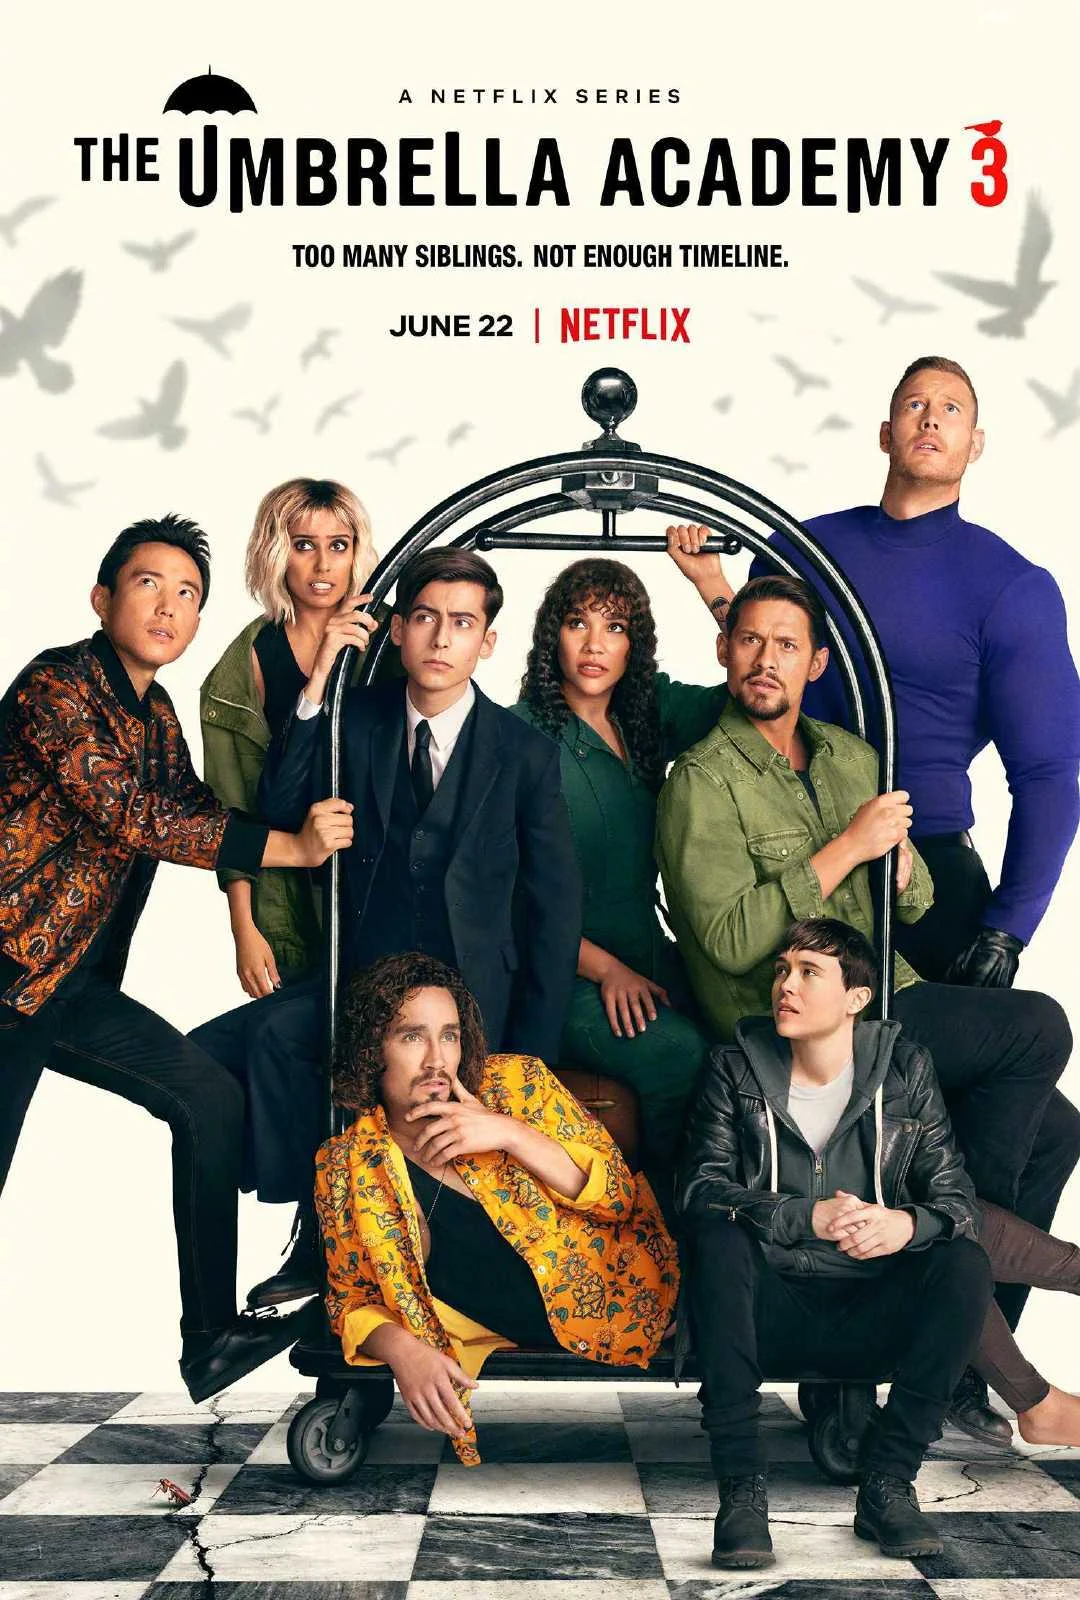 Netflix's hit drama "The Umbrella Academy Season 3" released the official trailer, it will be online on June 22